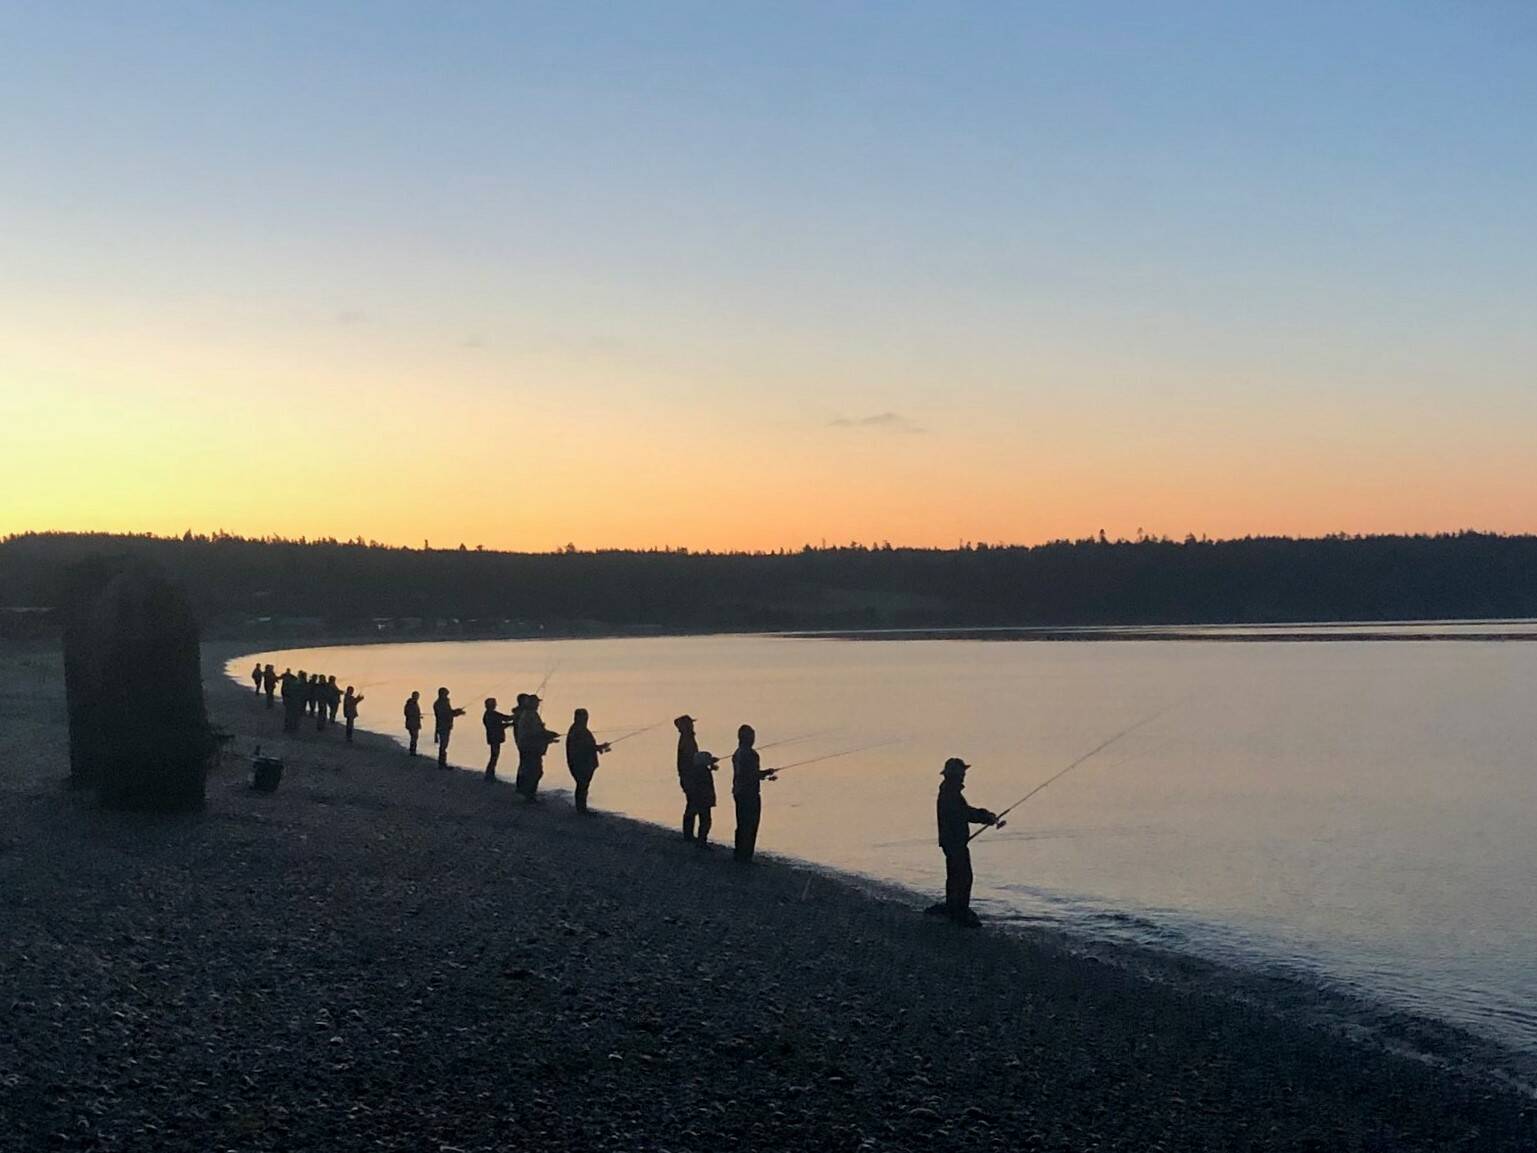 Photo provided
Fishers cast lines at Keystone Preserve in Central Whidbey.